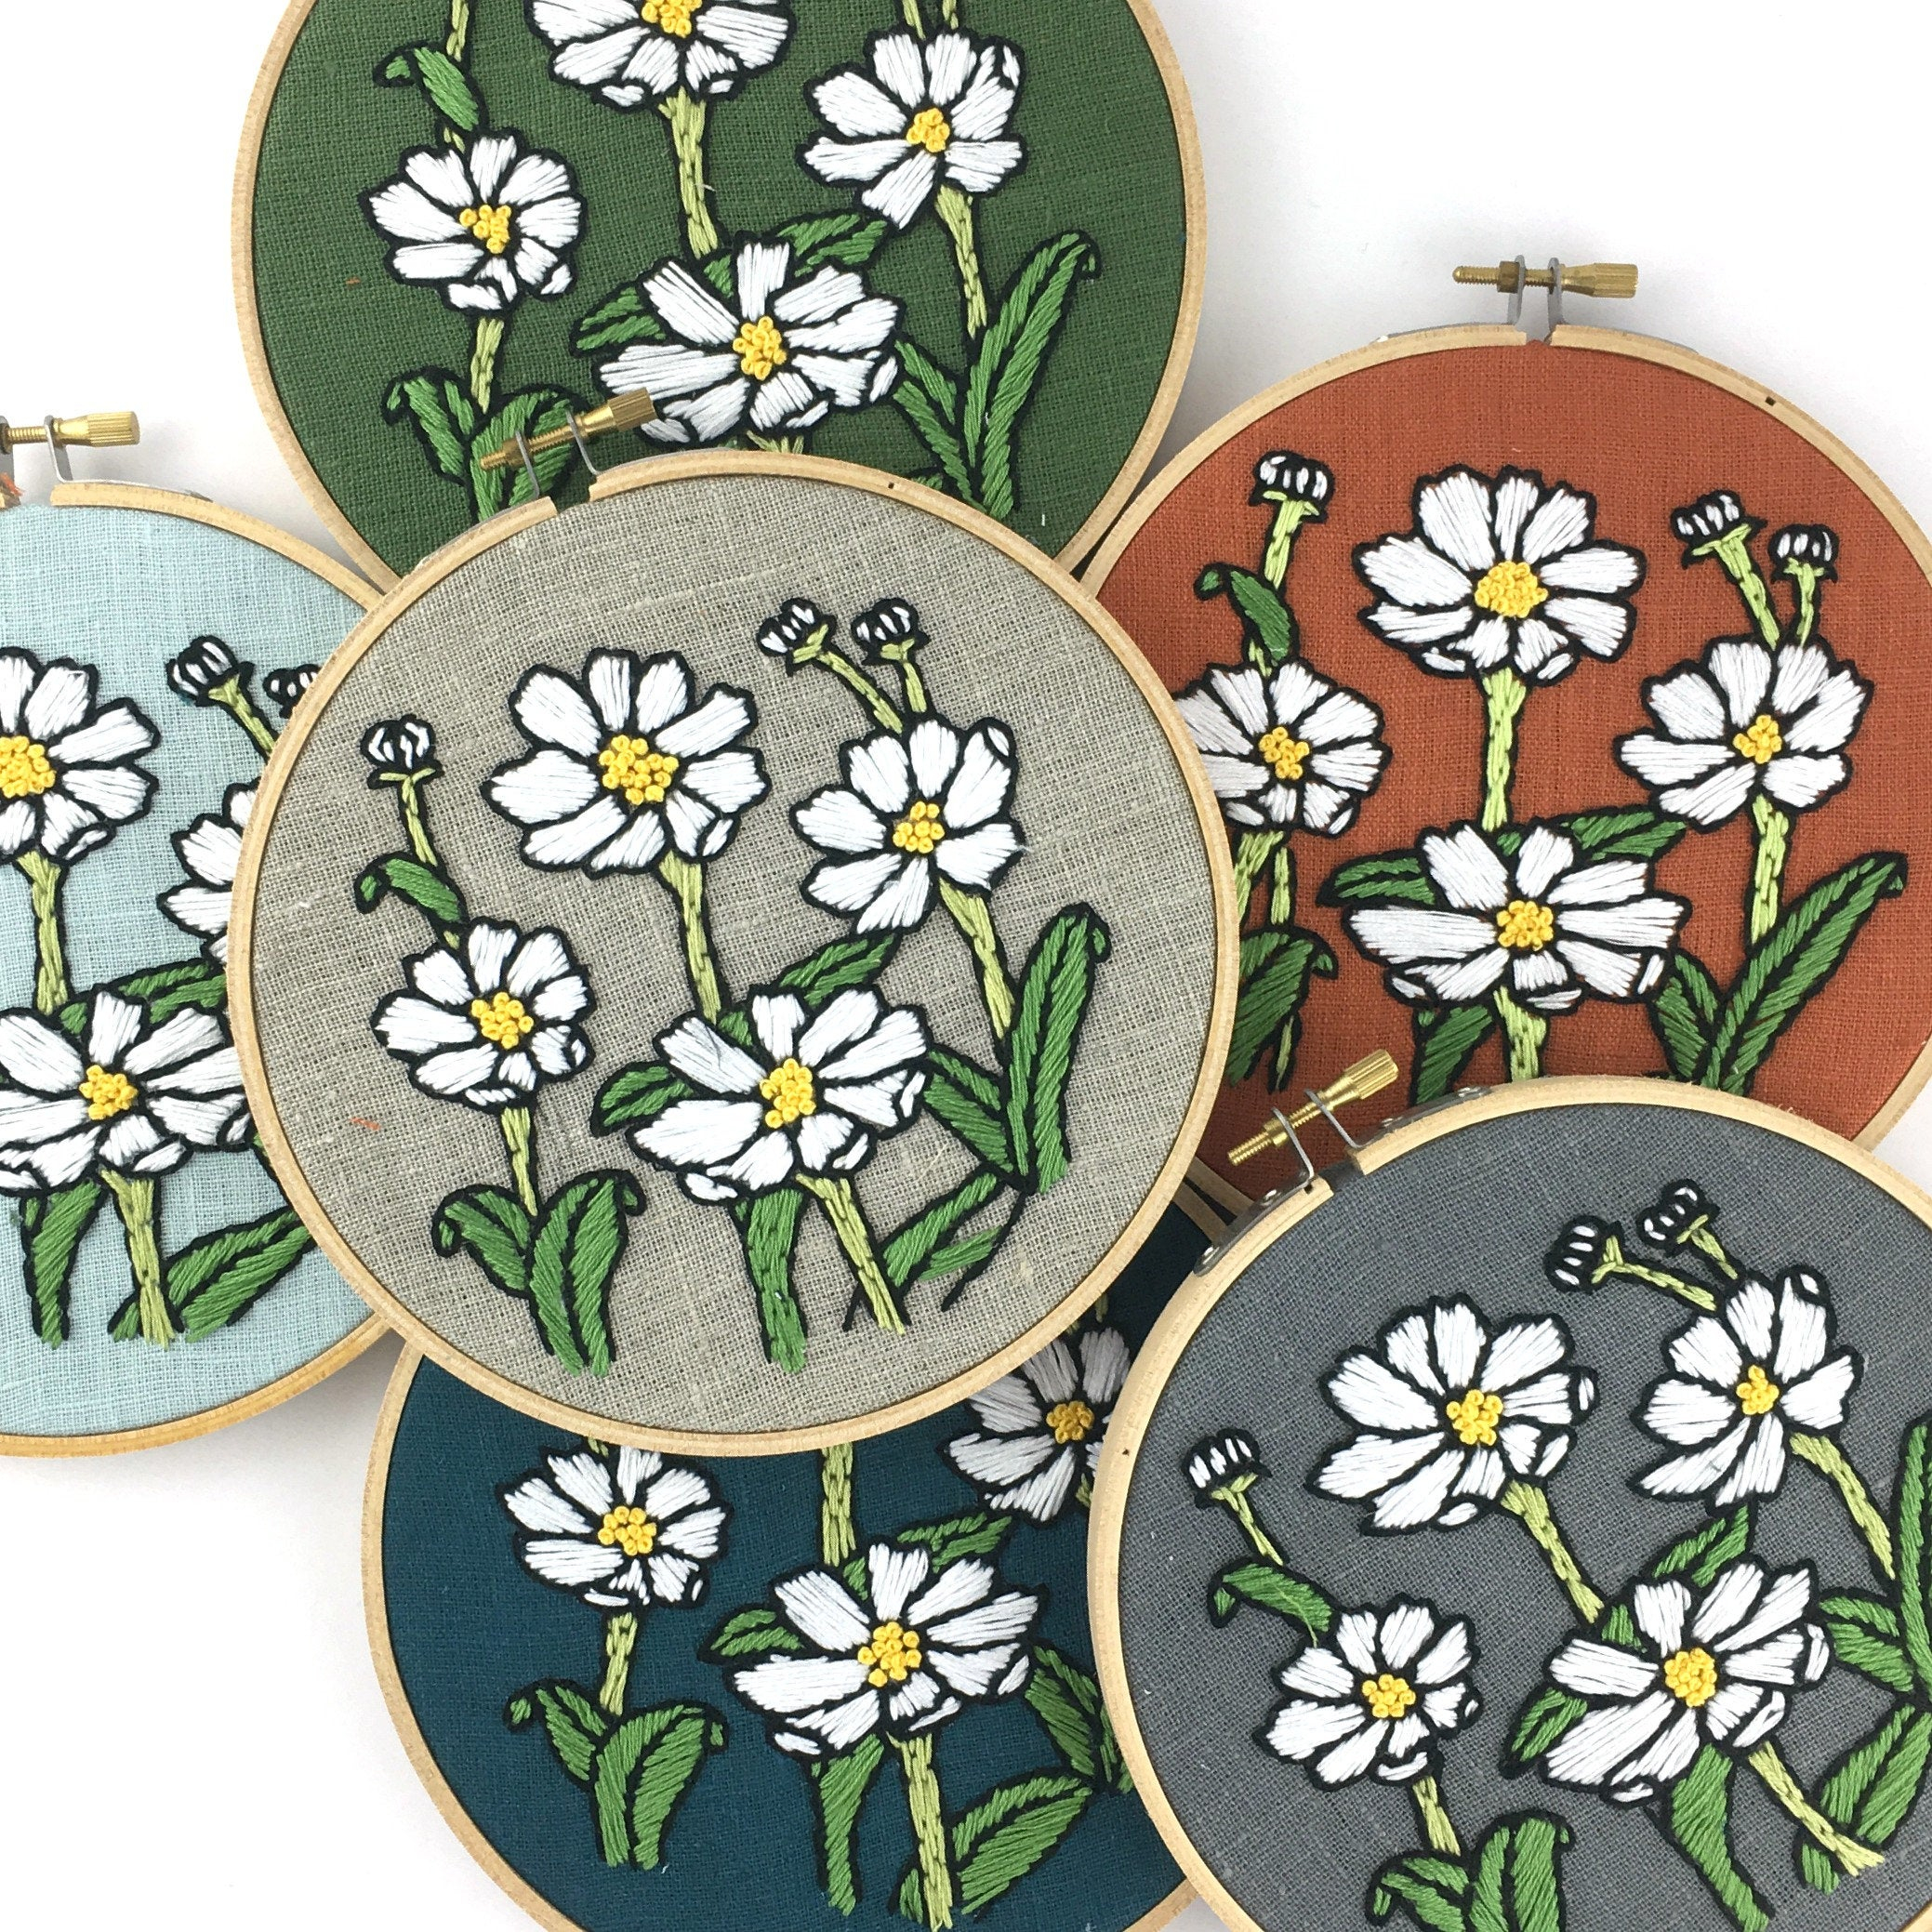 Indian Embroidery Patterns Daisies Embroidery Kit Beginner Floral Embroidery Floral